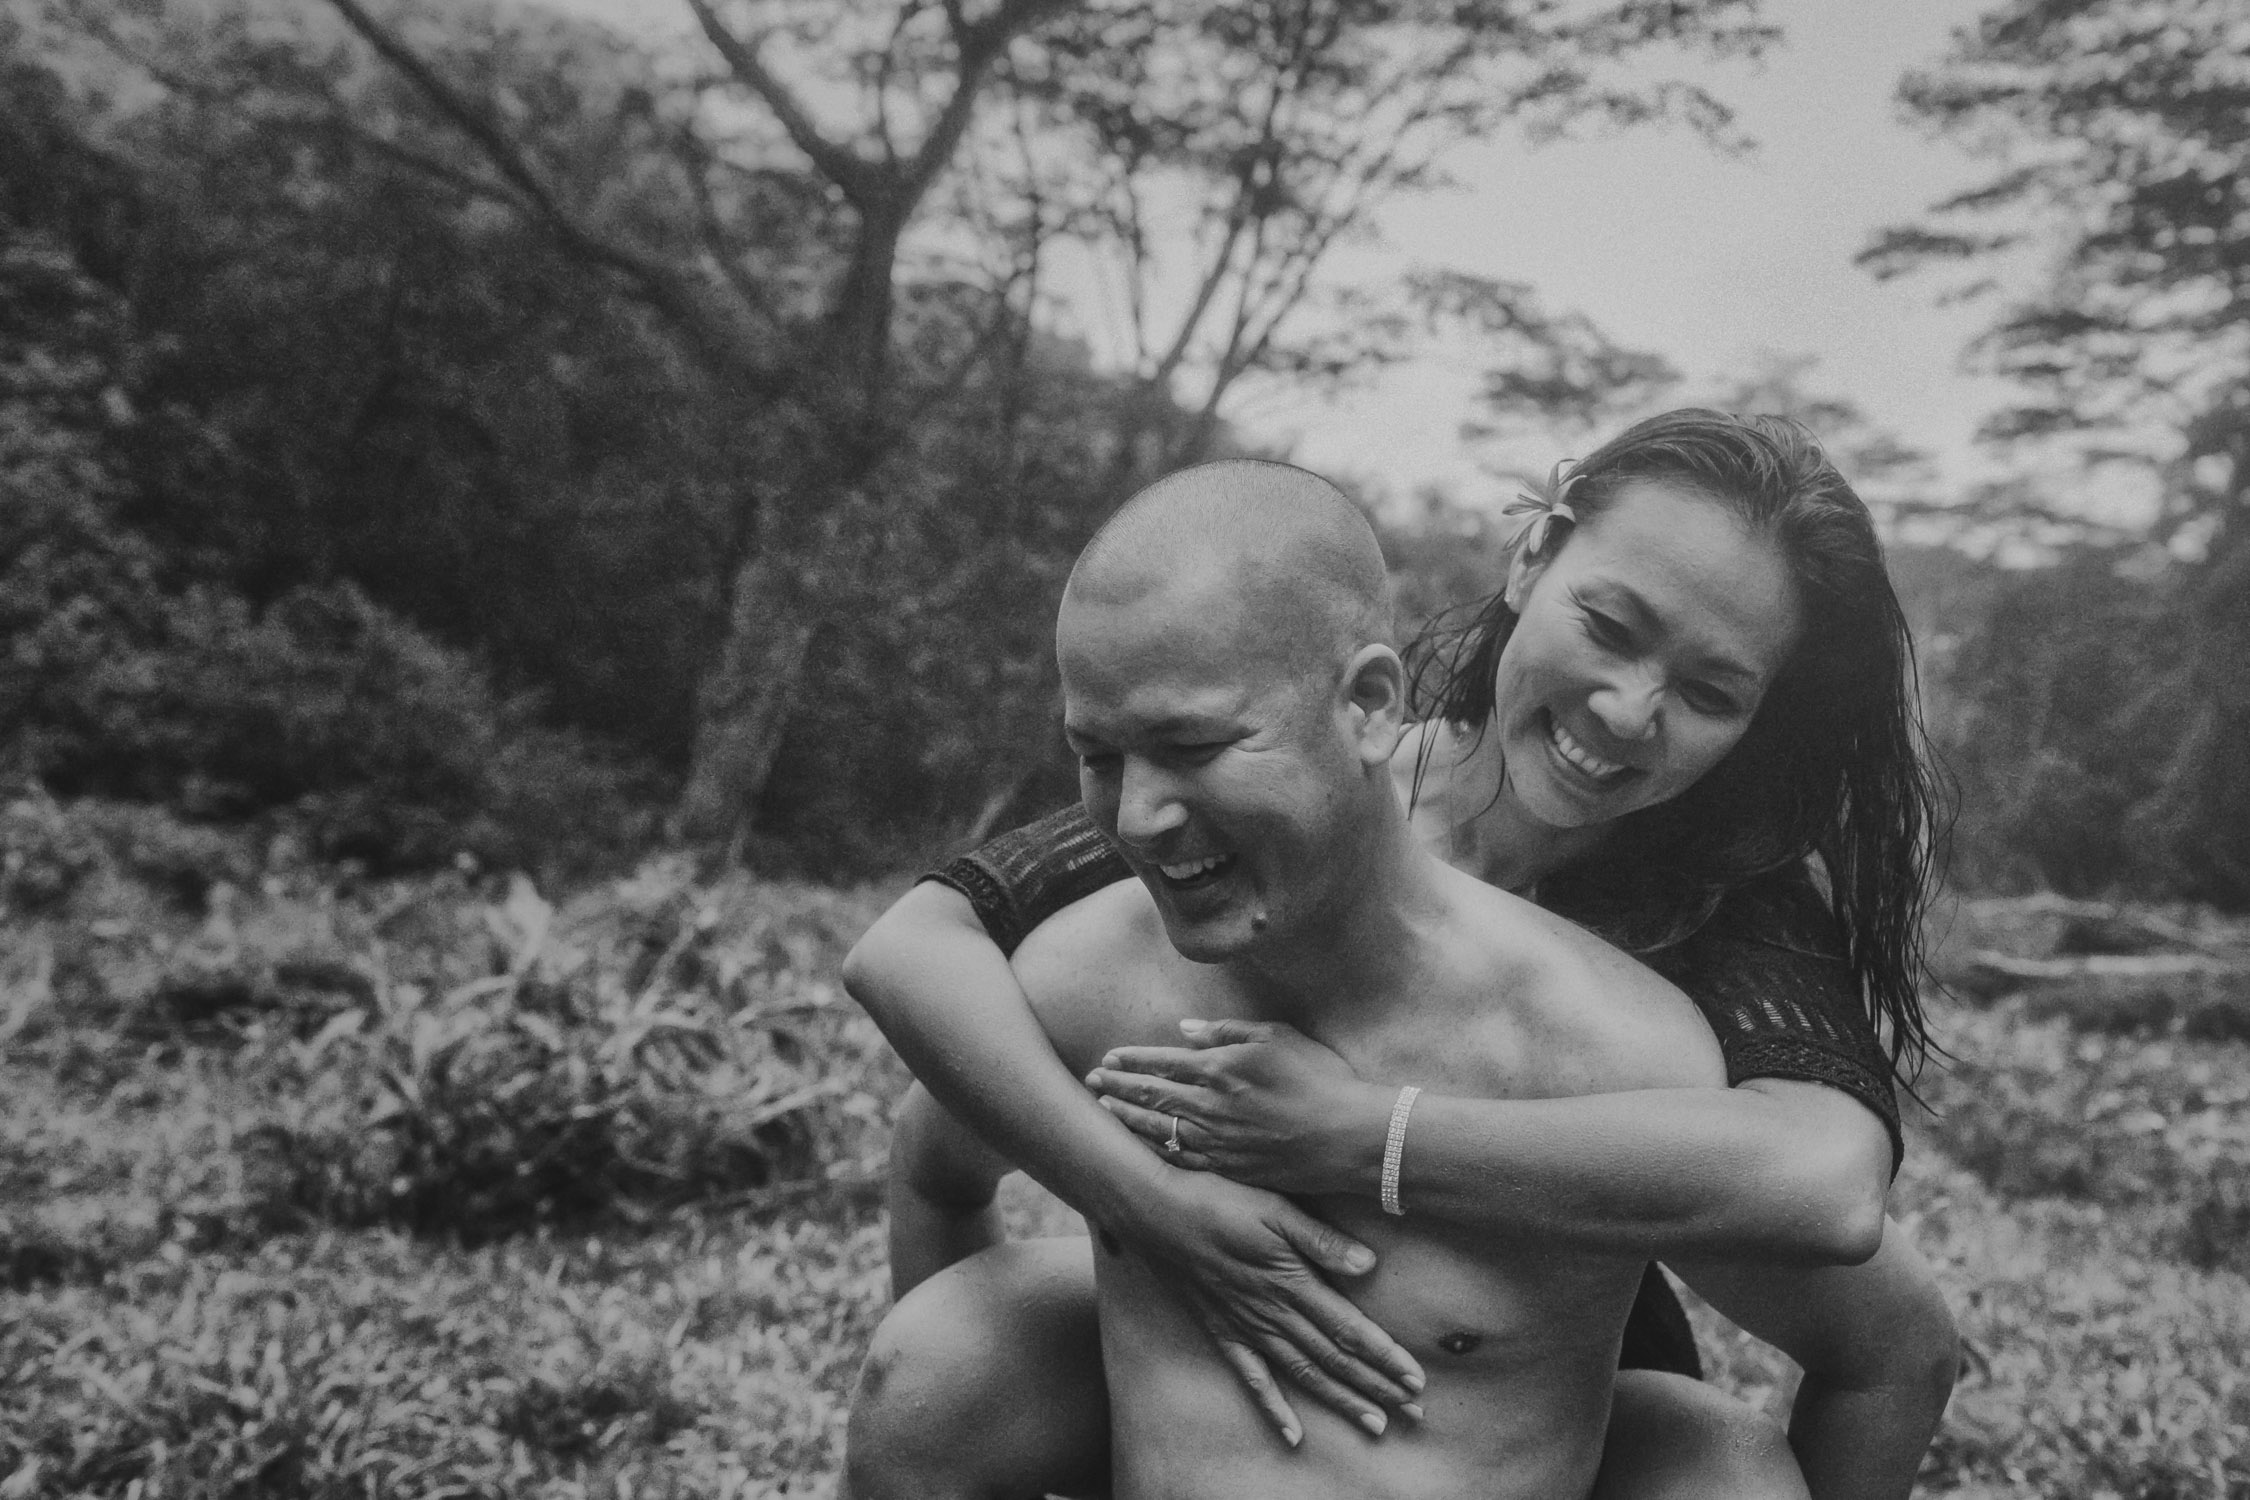 Man gives his fiance a piggyback ride in the rain during their Hawaii engagement photoshoot by Liz Koston.